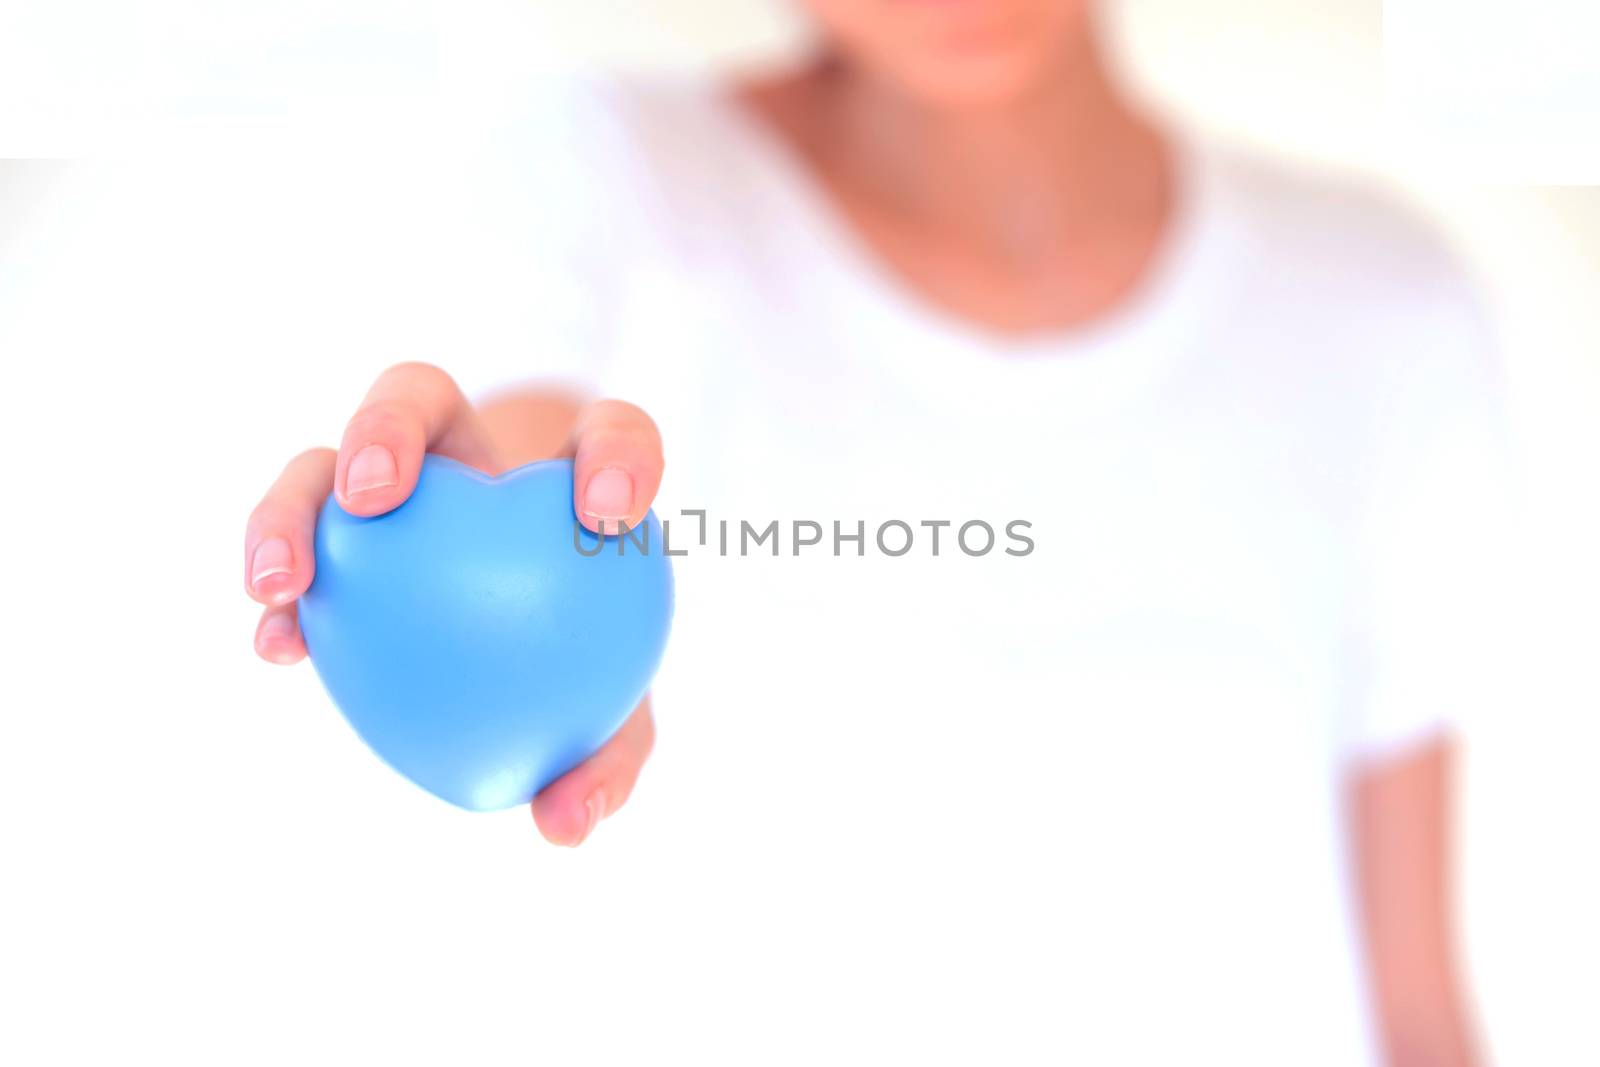 people, relationship and love concept - close up of womans cupped hands showing red heart